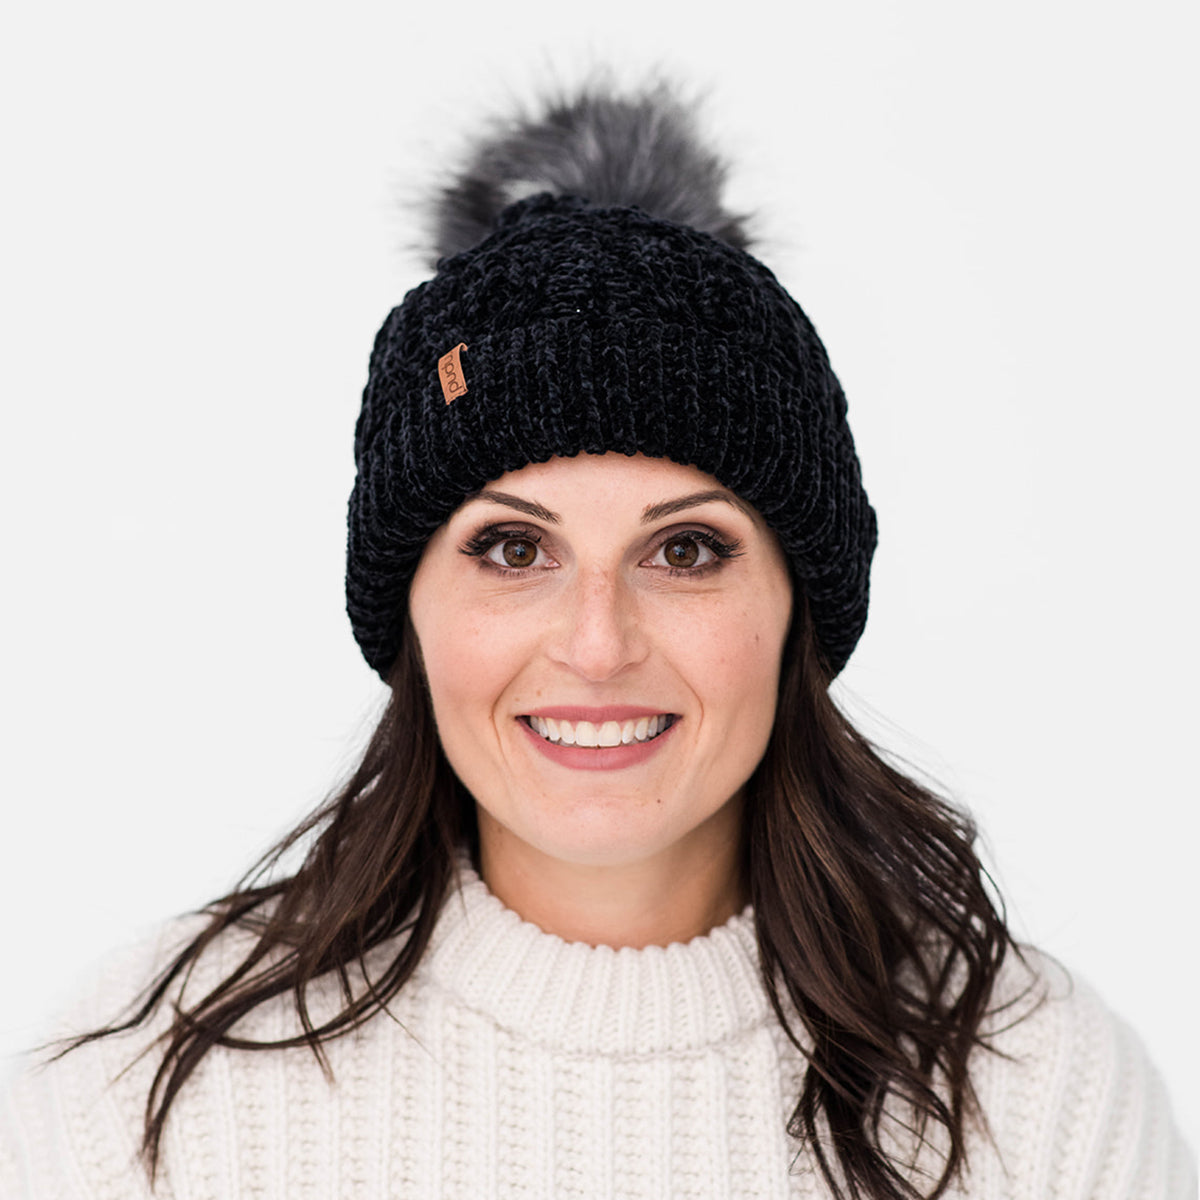 Recycled Beanie Hat - Chenille Knit Black